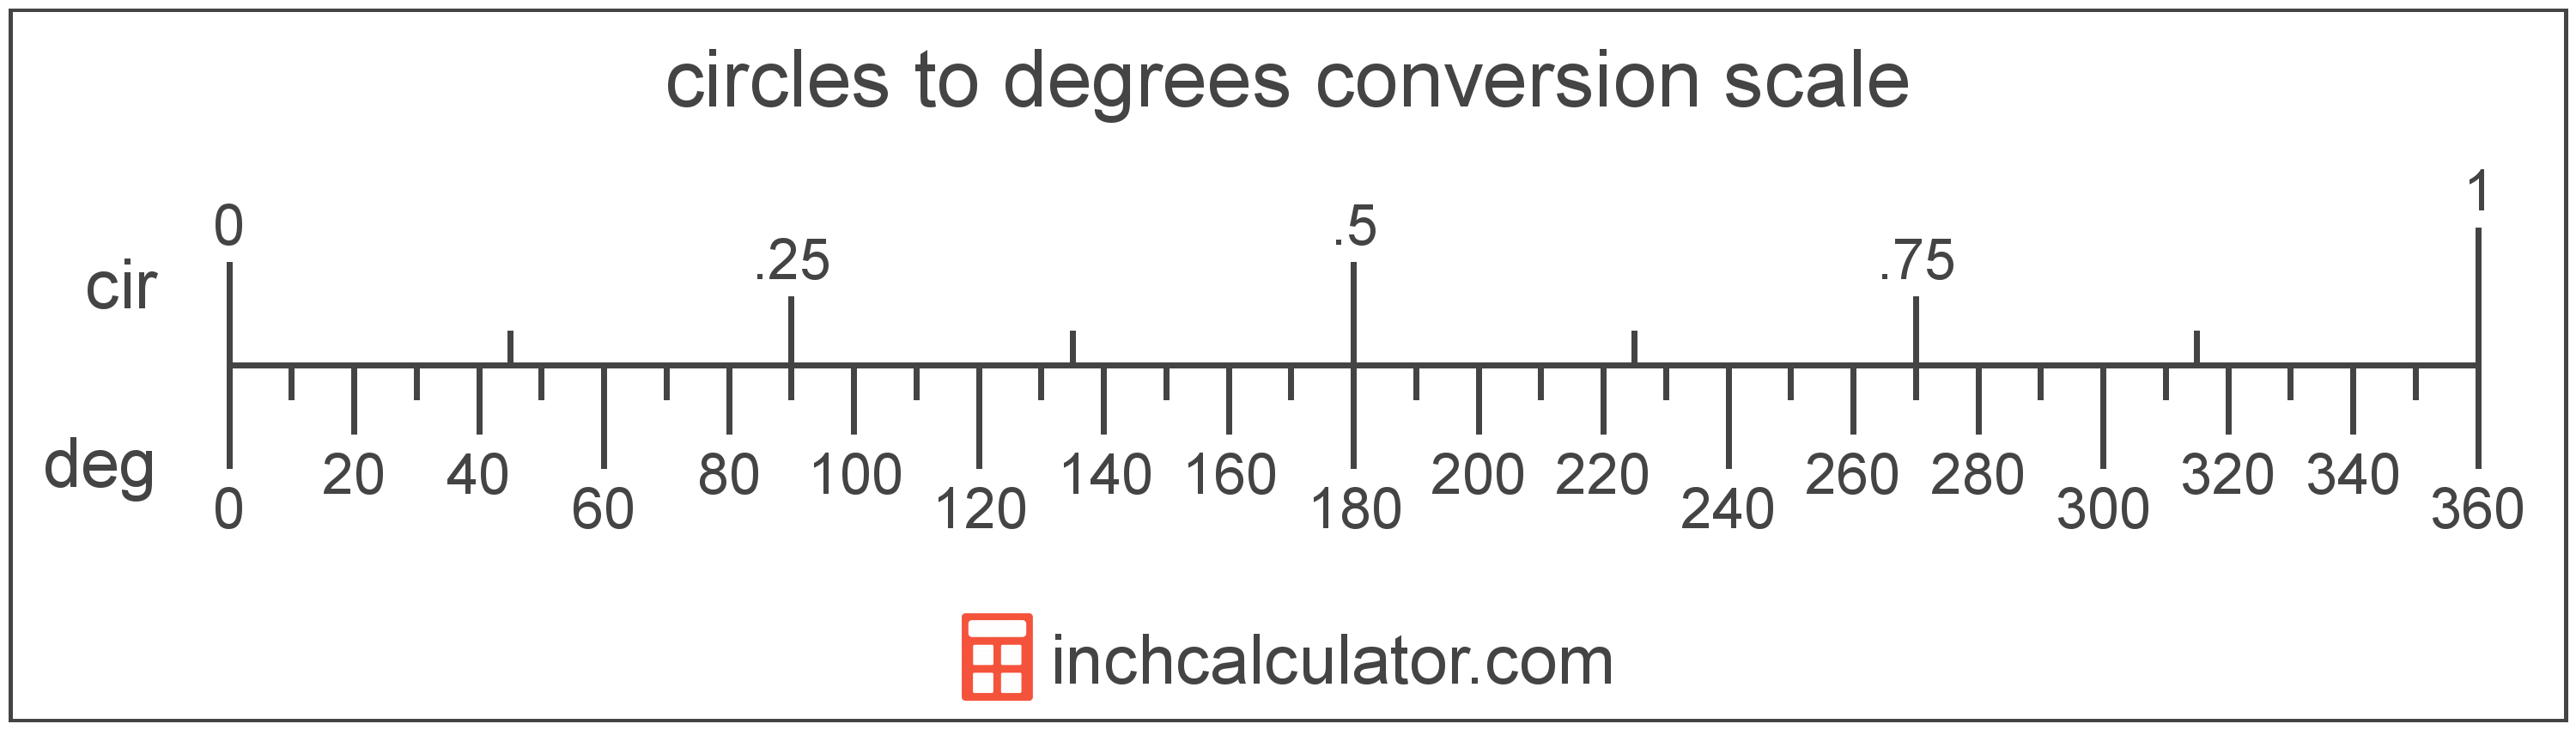 conversion scale showing degrees and equivalent circles angle values